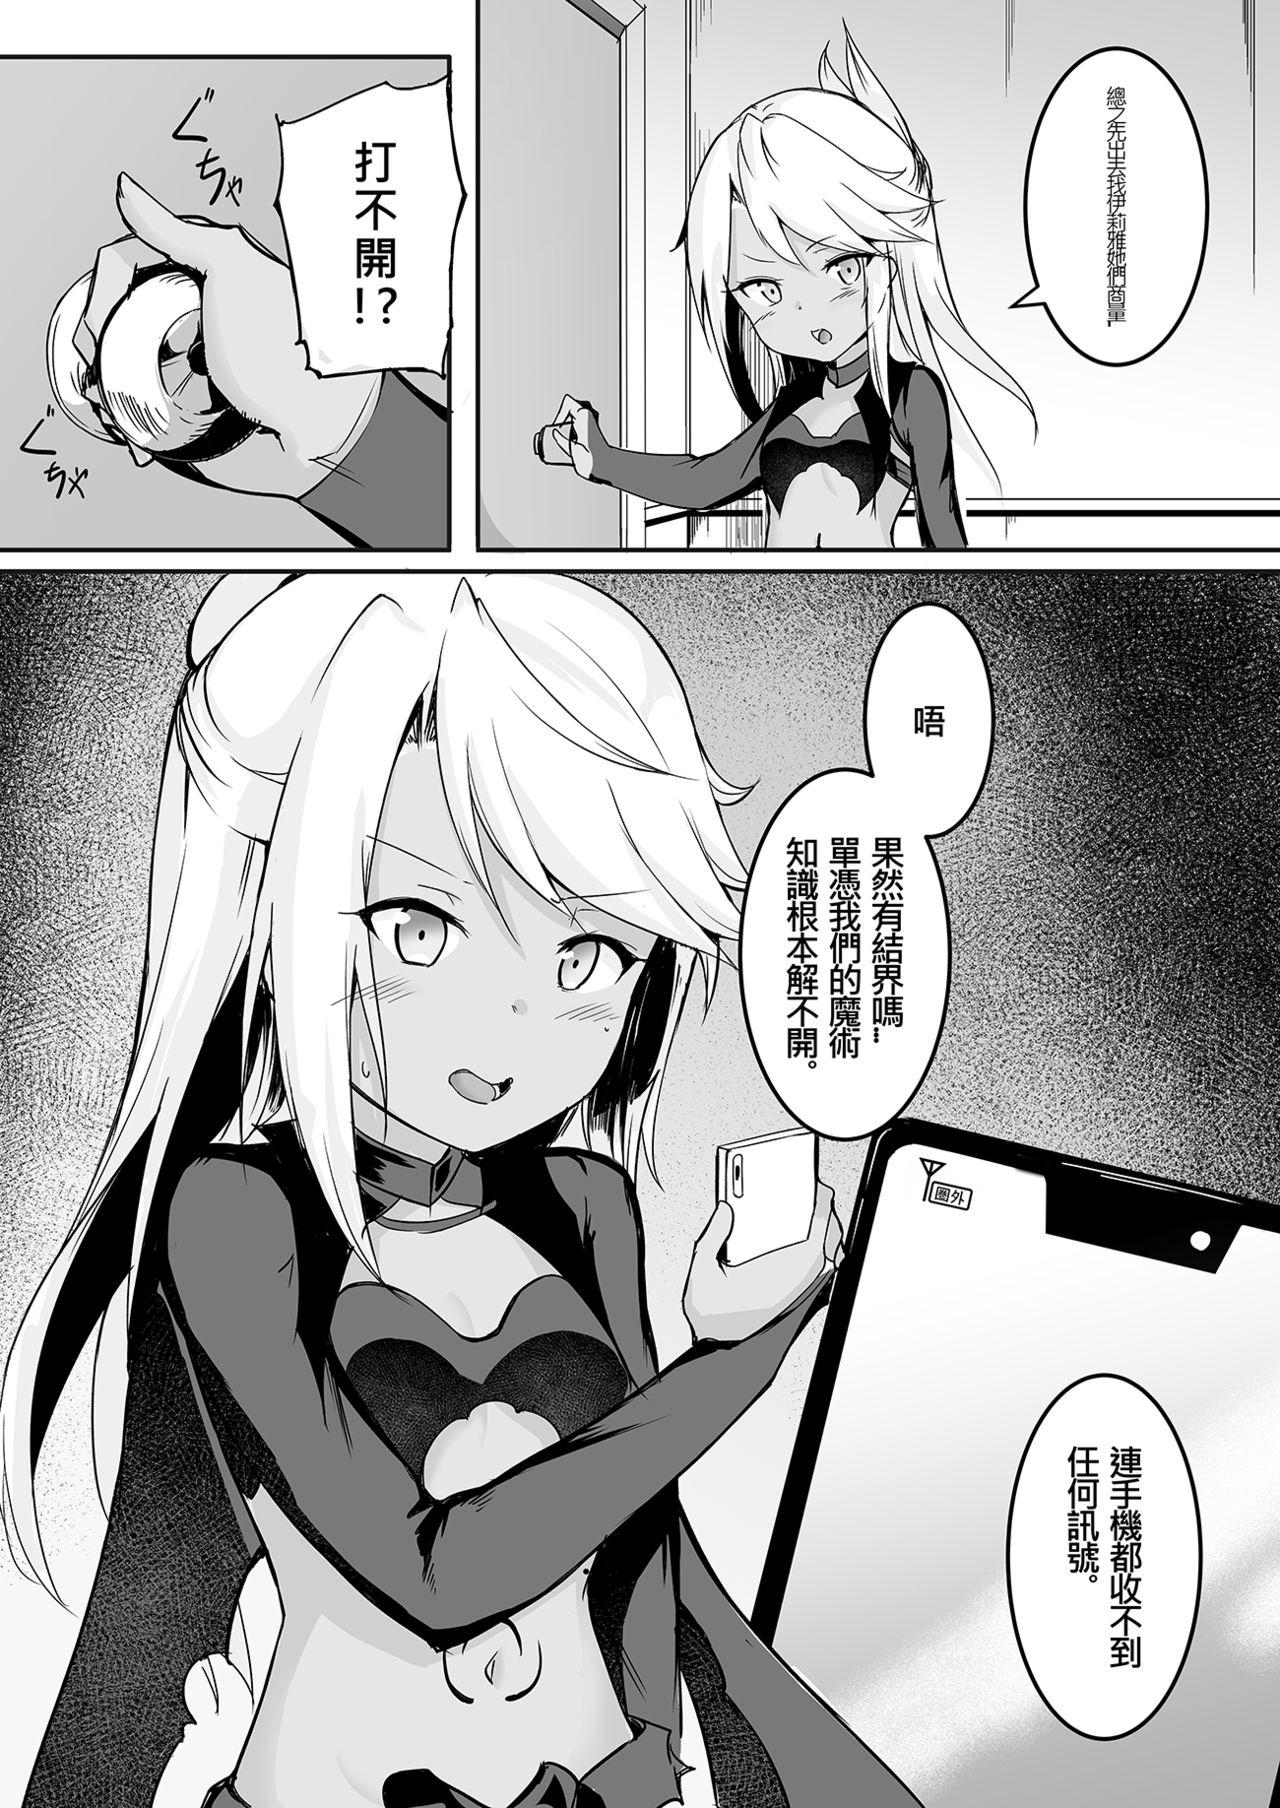 Mmf CHLOE x CHLOE - Fate kaleid liner prisma illya Old Young - Page 7